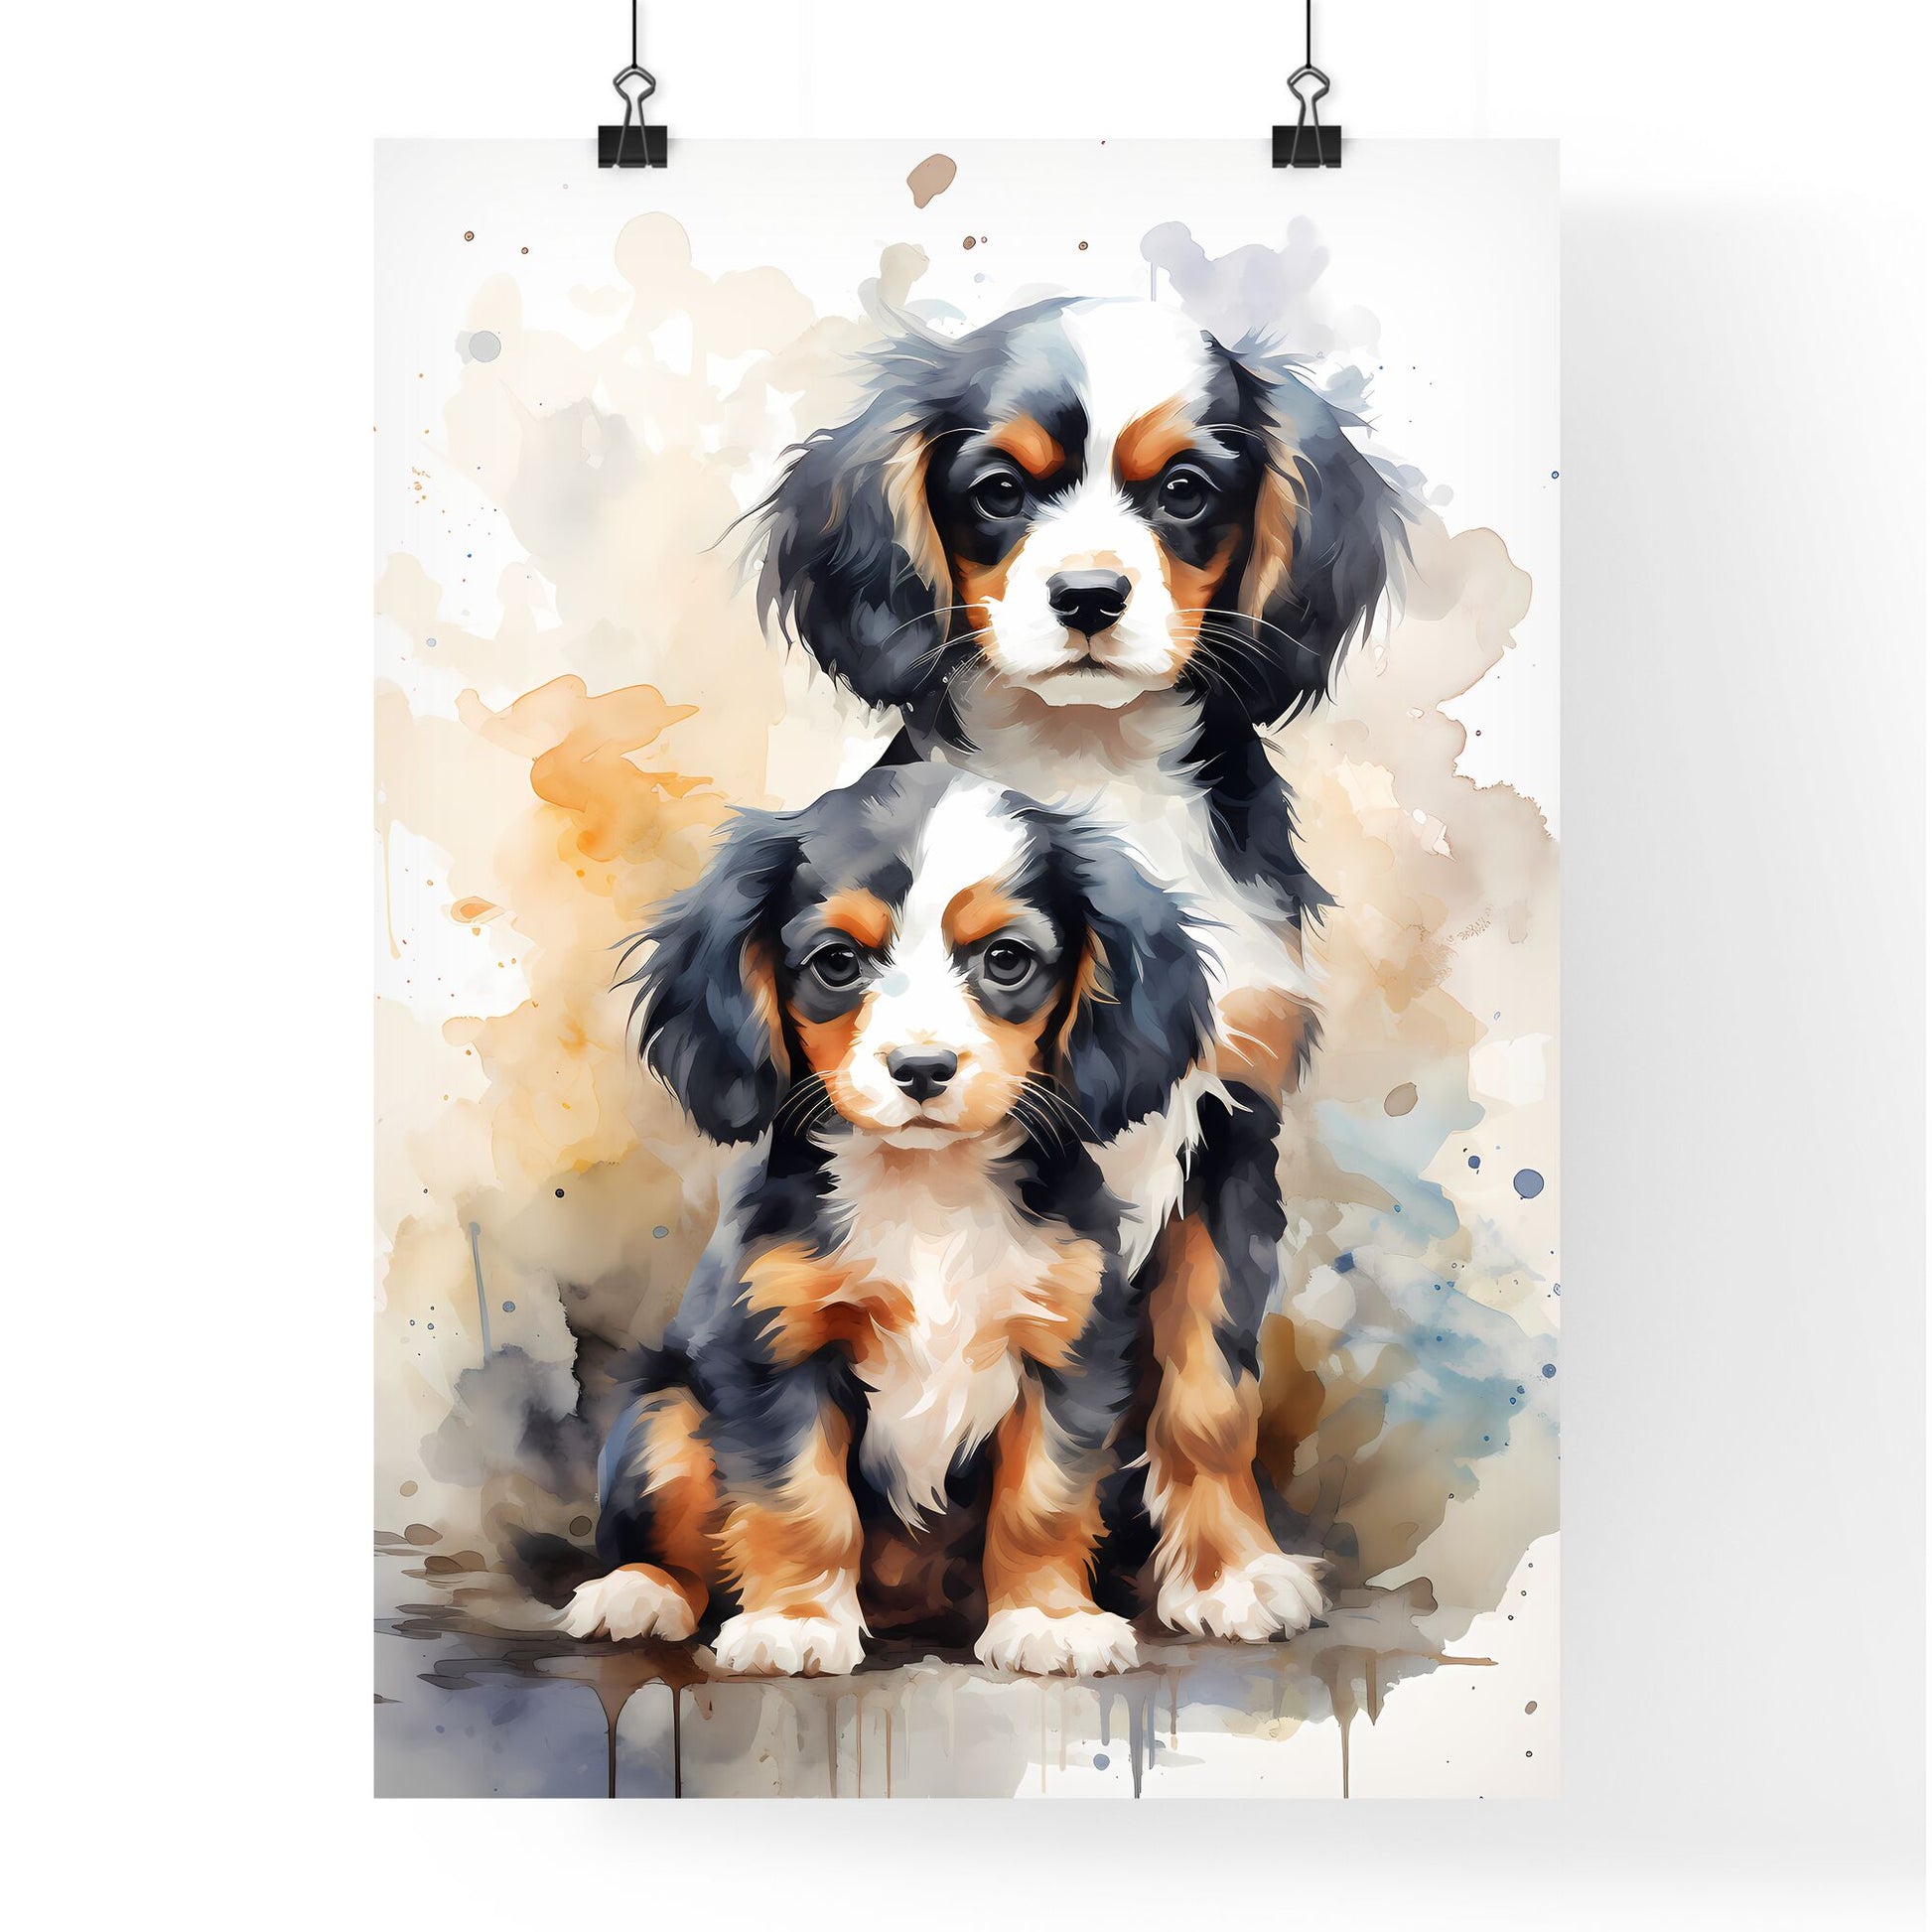 Two Cavalier King Charles Spaniel Puppies - A Couple Of Dogs Sitting Together Default Title